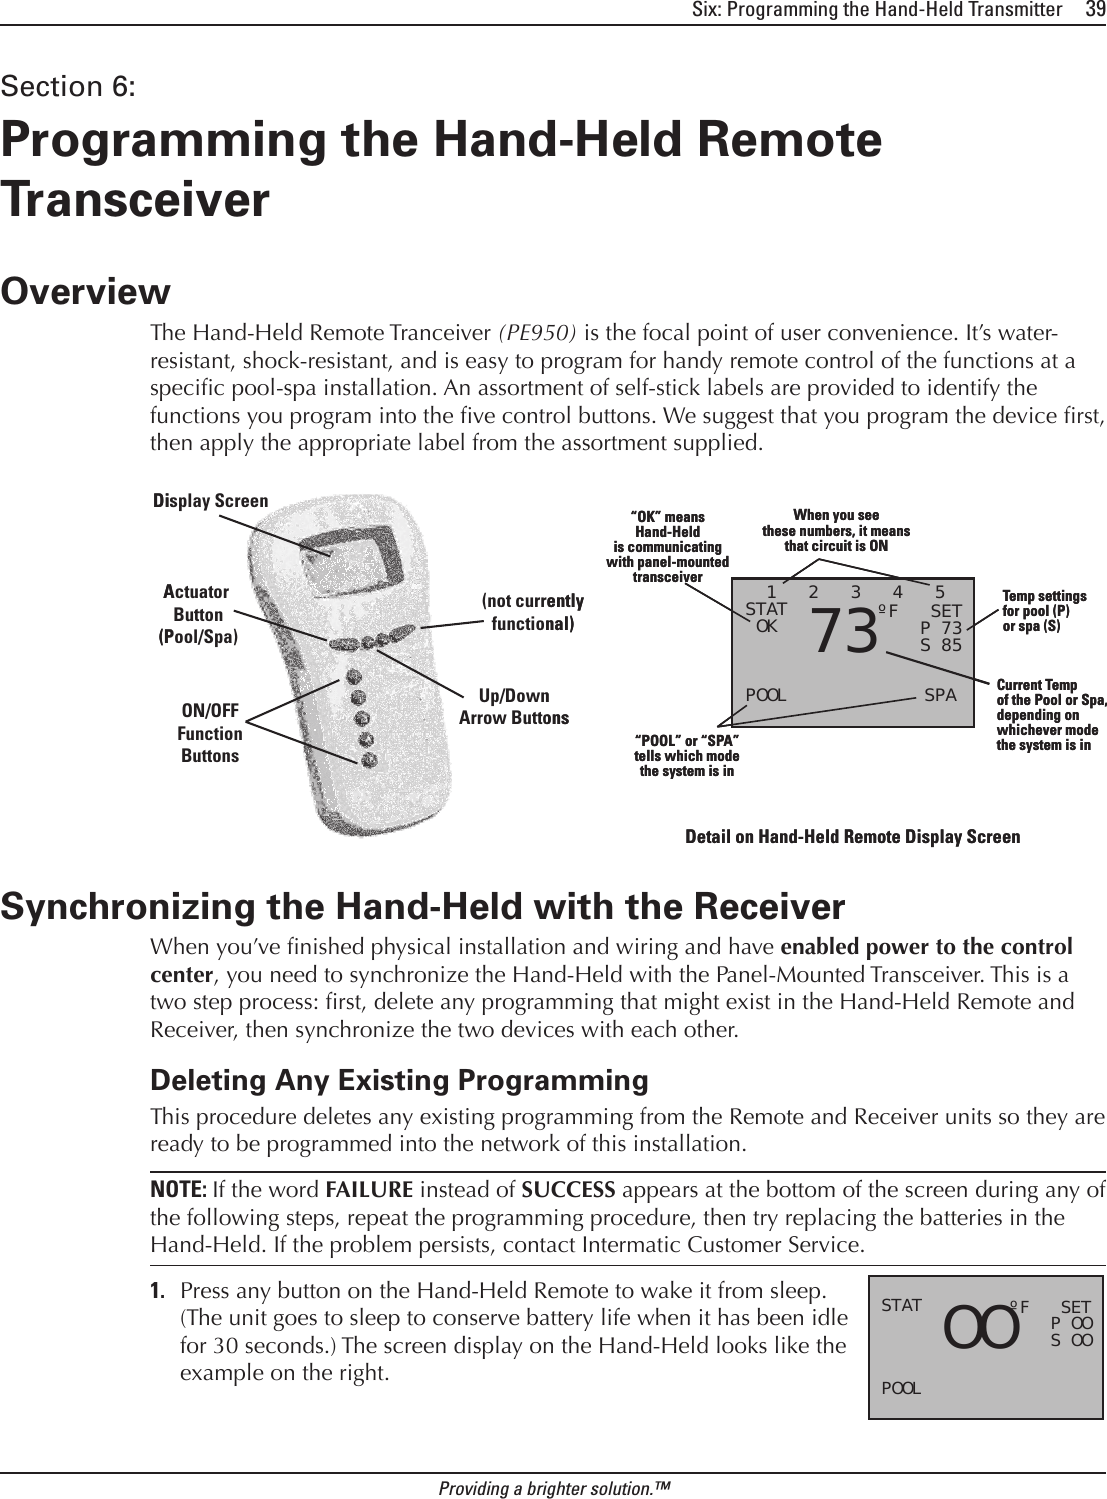 Six: Programming the Hand-Held Transmitter     39Providing a brighter solution.™Section 6:  Programming the Hand-Held Remote TransceiverOverviewThe Hand-Held Remote Tranceiver (PE950) is the focal point of user convenience. It’s water-resistant, shock-resistant, and is easy to program for handy remote control of the functions at a specic pool-spa installation. An assortment of self-stick labels are provided to identify the functions you program into the ve control buttons. We suggest that you program the device rst, then apply the appropriate label from the assortment supplied.Synchronizing the Hand-Held with the ReceiverWhen you’ve nished physical installation and wiring and have enabled power to the control center, you need to synchronize the Hand-Held with the Panel-Mounted Transceiver. This is a two step process: rst, delete any programming that might exist in the Hand-Held Remote and Receiver, then synchronize the two devices with each other. Deleting Any Existing ProgrammingThis procedure deletes any existing programming from the Remote and Receiver units so they are ready to be programmed into the network of this installation.NOTE: If the word FAILURE instead of SUCCESS appears at the bottom of the screen during any of the following steps, repeat the programming procedure, then try replacing the batteries in the Hand-Held. If the problem persists, contact Intermatic Customer Service. Press any button on the Hand-Held Remote to wake it from sleep. (The unit goes to sleep to conserve battery life when it has been idle for 30 seconds.) The screen display on the Hand-Held looks like the example on the right.1.Actuator Button(Pool/Spa)(not currentlyfunctional)Display ScreenON/OFFFunctionButtonsUp/DownArrow ButtonsActuator Button(Pool/Spa)(not currentlyfunctional)Display ScreenON/OFFFunctionButtonsUp/DownArrow Buttons  1   2   3   4   5STAT OK POOL             SPA     73ºF   SET    P 73    S 85When you seethese numbers, it meansthat circuit is ON“POOL” or “SPA”tells which modethe system is in“OK” meansHand-Heldis communicatingwith panel-mountedtransceiverCurrent Tempof the Pool or Spa,depending on whichever modethe system is inTemp settingsfor pool (P)or spa (S)  1   2   3   4   5STAT OK POOL             SPA     73ºF   SET    P 73    S 85When you seethese numbers, it meansthat circuit is ON“POOL” or “SPA”tells which modethe system is in“OK” meansHand-Heldis communicatingwith panel-mountedtransceiverCurrent Tempof the Pool or Spa,depending on whichever modethe system is inTemp settingsfor pool (P)or spa (S)Detail on Hand-Held Remote Display ScreenDetail on Hand-Held Remote Display ScreenSTAT POOL     OOºF   SET    P OO    S OOSTAT POOL     OOºF   SET    P OO    S OO